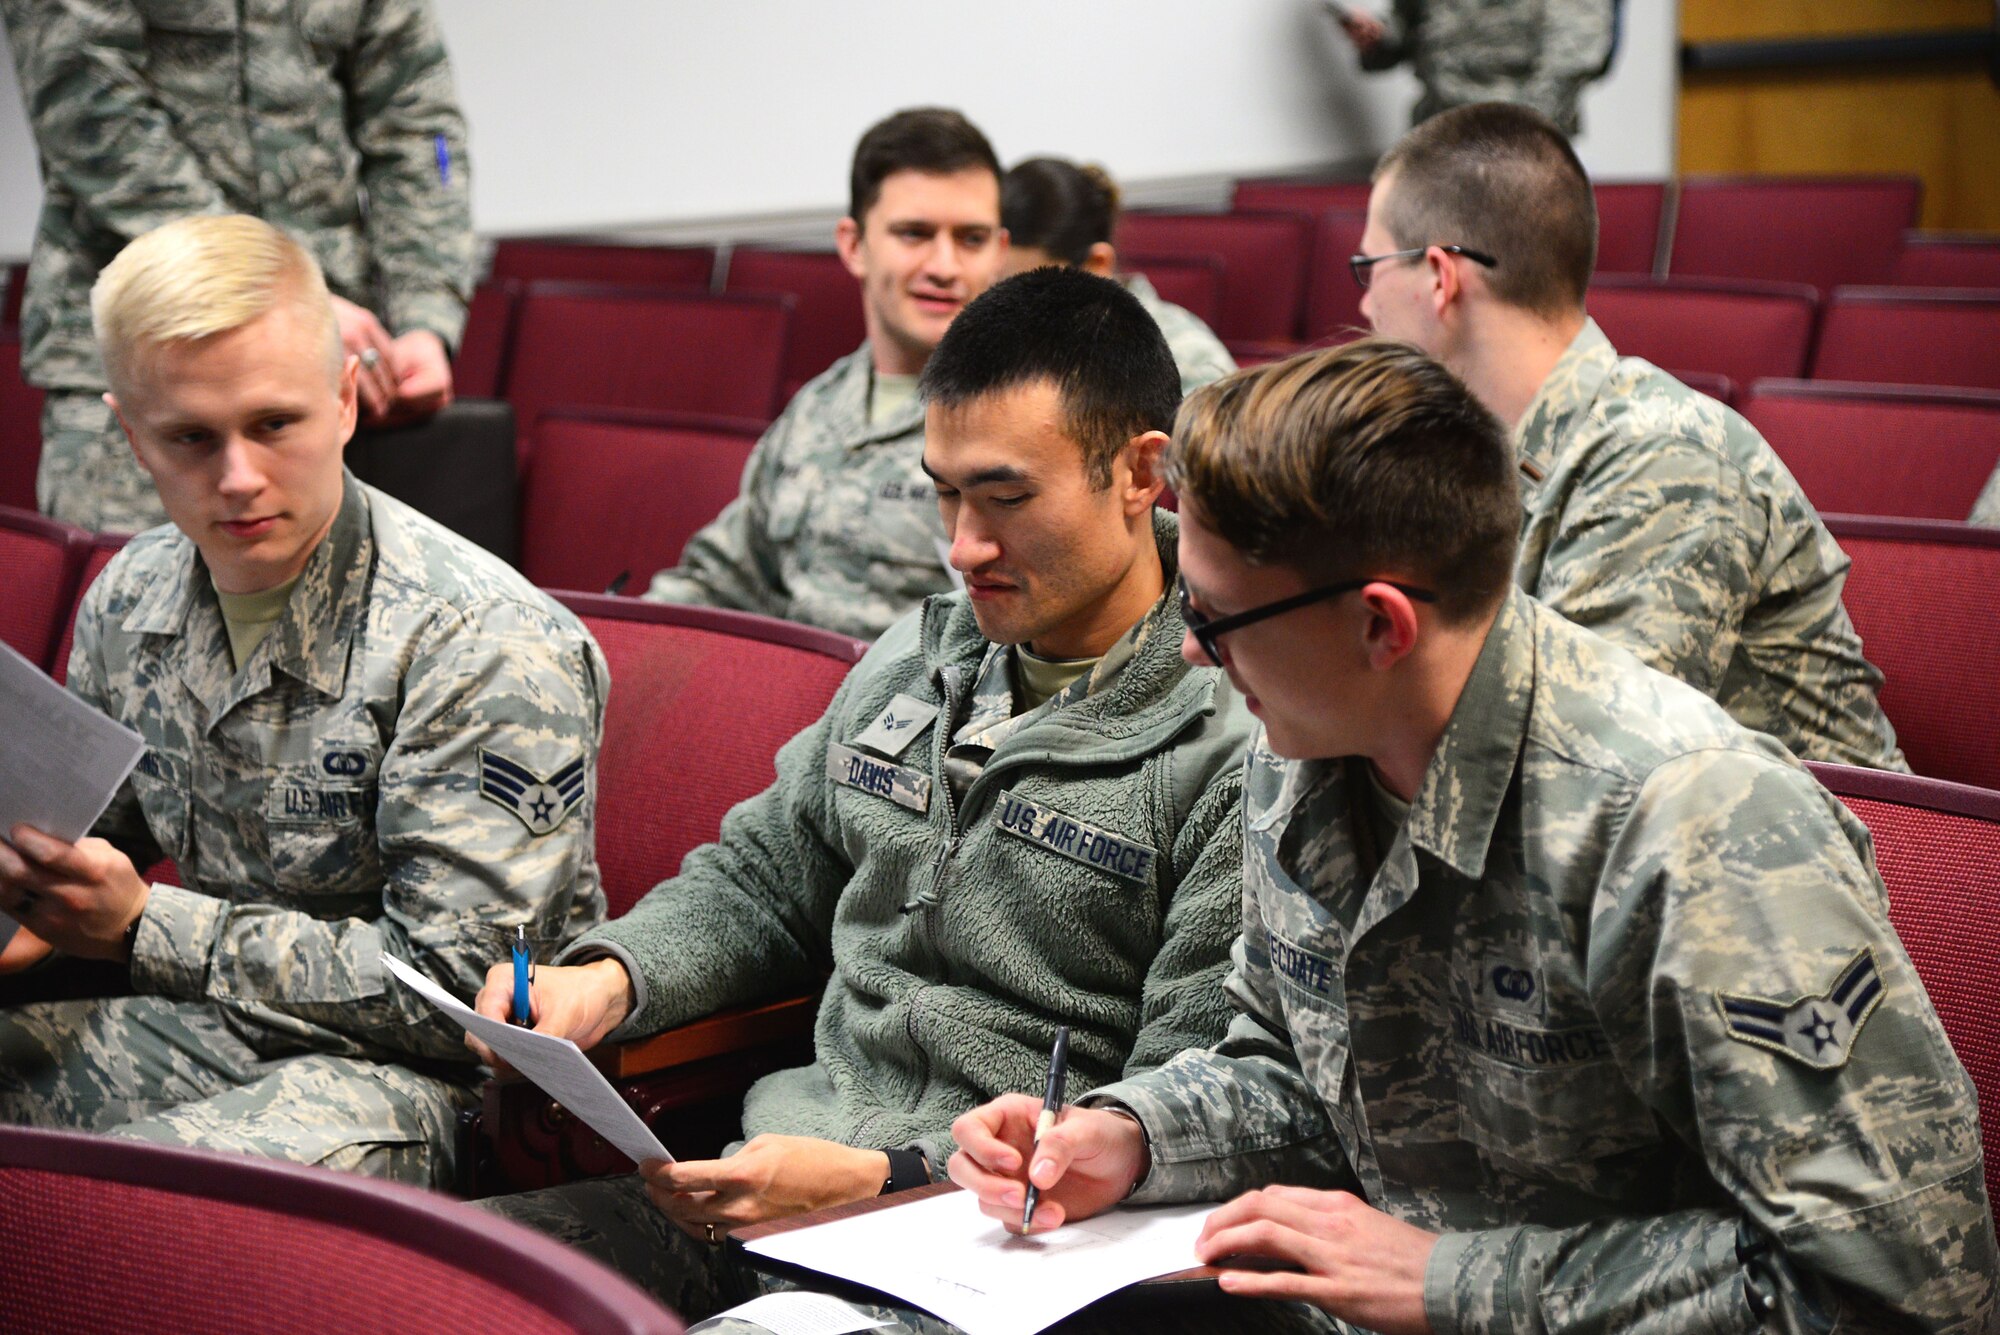 Participants of an Adaptive Flight Training Study complete a pre-study questionnaire Jan. 9, 2018, on Columbus Air Force Base, Mississippi. Over 30 participants were involved in the study, with 15 of those subjects wearing heart monitors to gather additional data. Researchers were at Columbus AFB for three days, with each participant flying for up to an hour, two days in a row. (U.S. Air Force photo by Airman 1st Class Keith Holcomb)